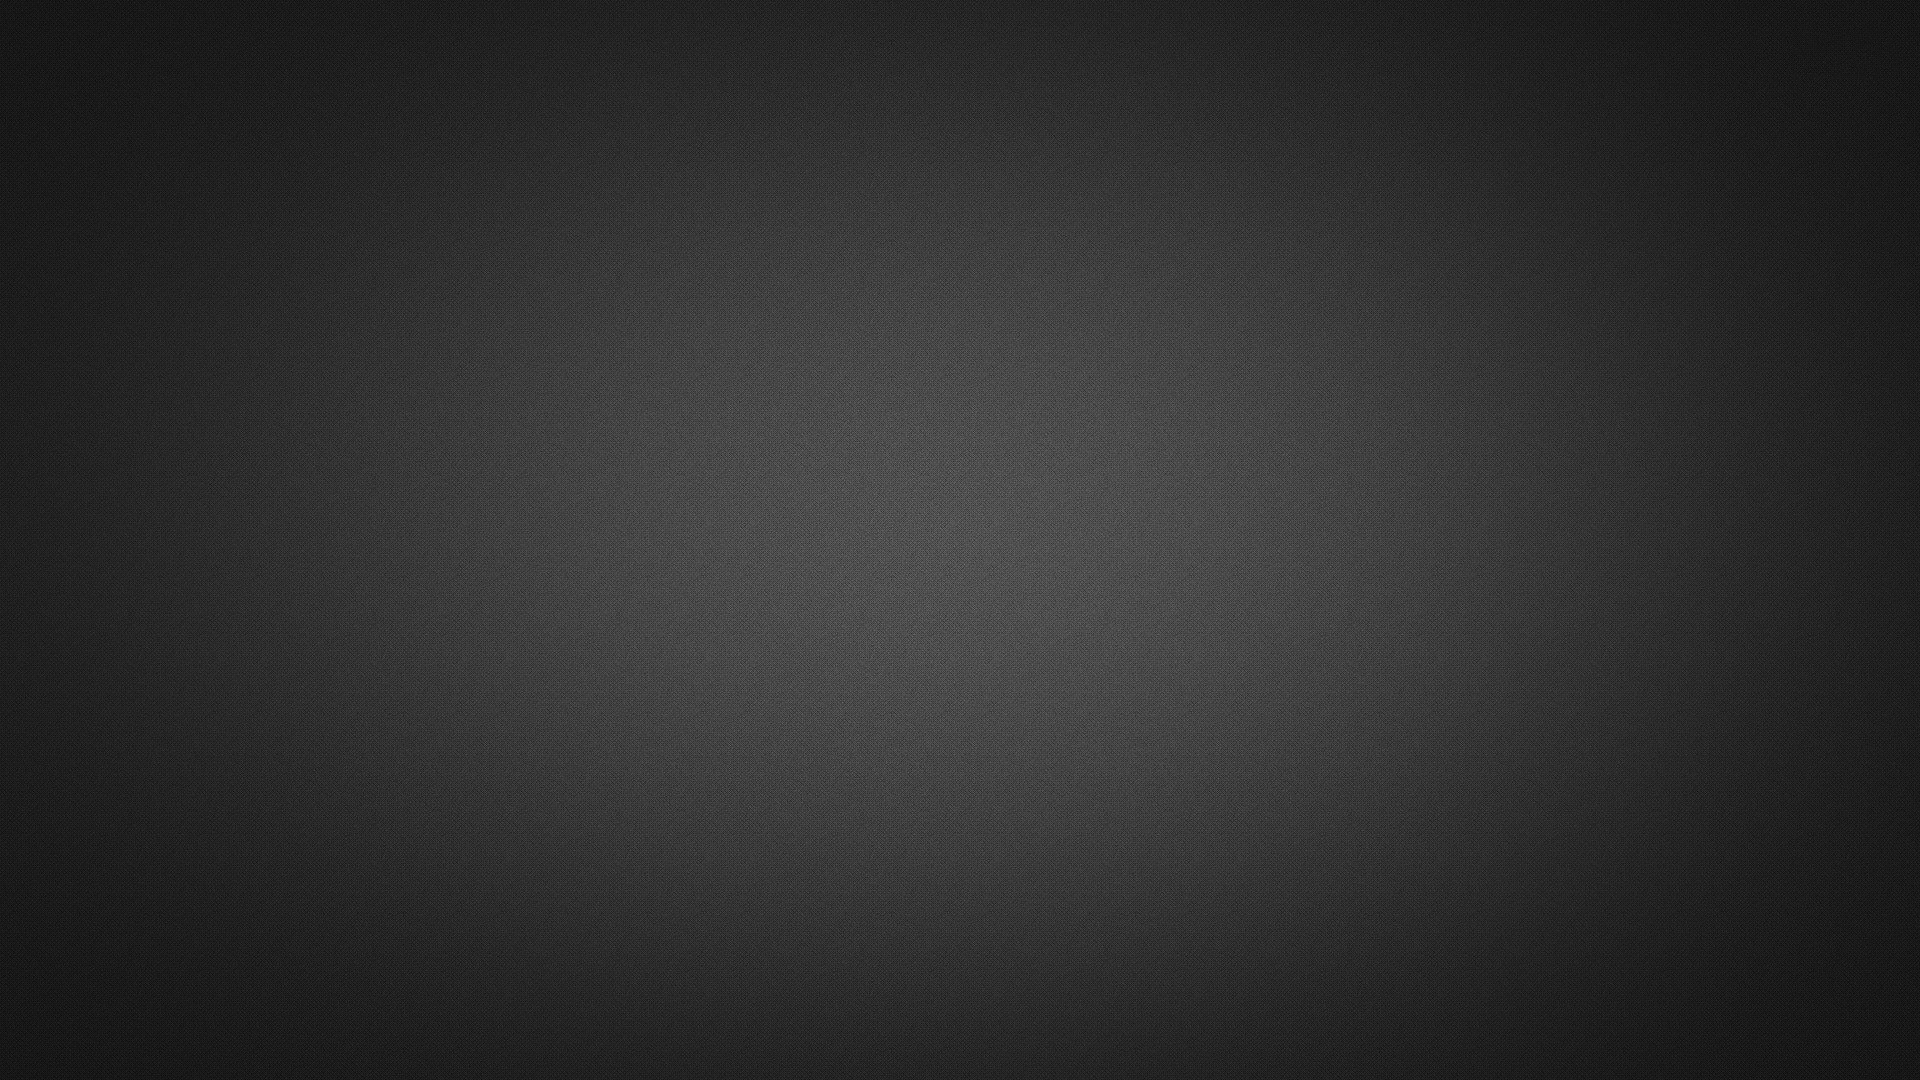 1920x1080 Download Free Grey Texture Background Image